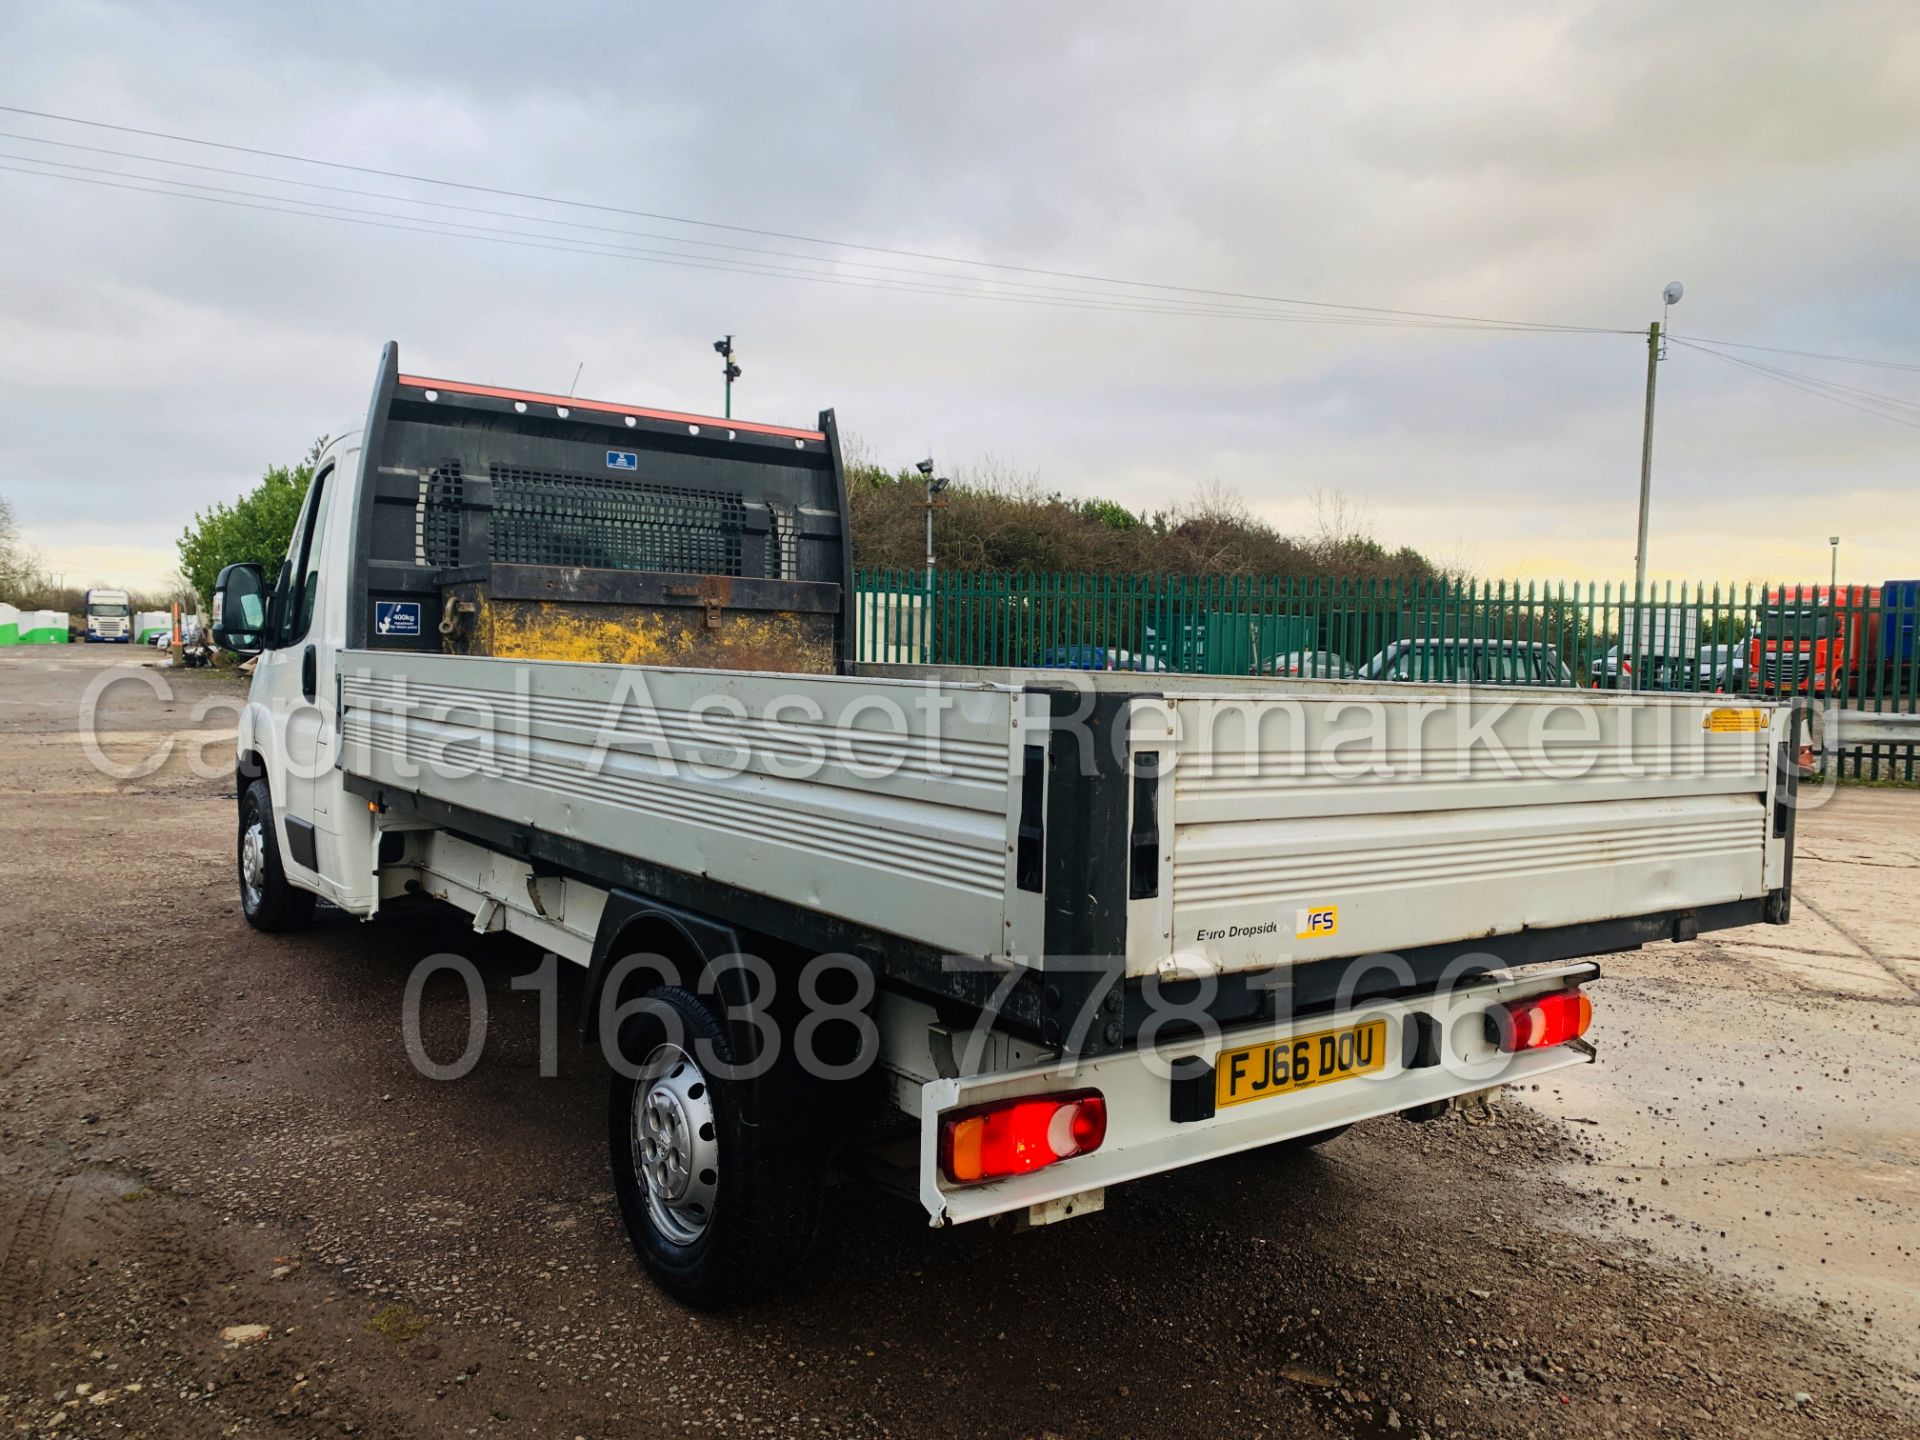 PEUGEOT BOXER *LWB - DROPSIDE TRUCK* (2017 - EURO 6 MODEL) '2.0 HDI - 6 SPEED' *ONLY 45,000 MILES* - Image 10 of 35